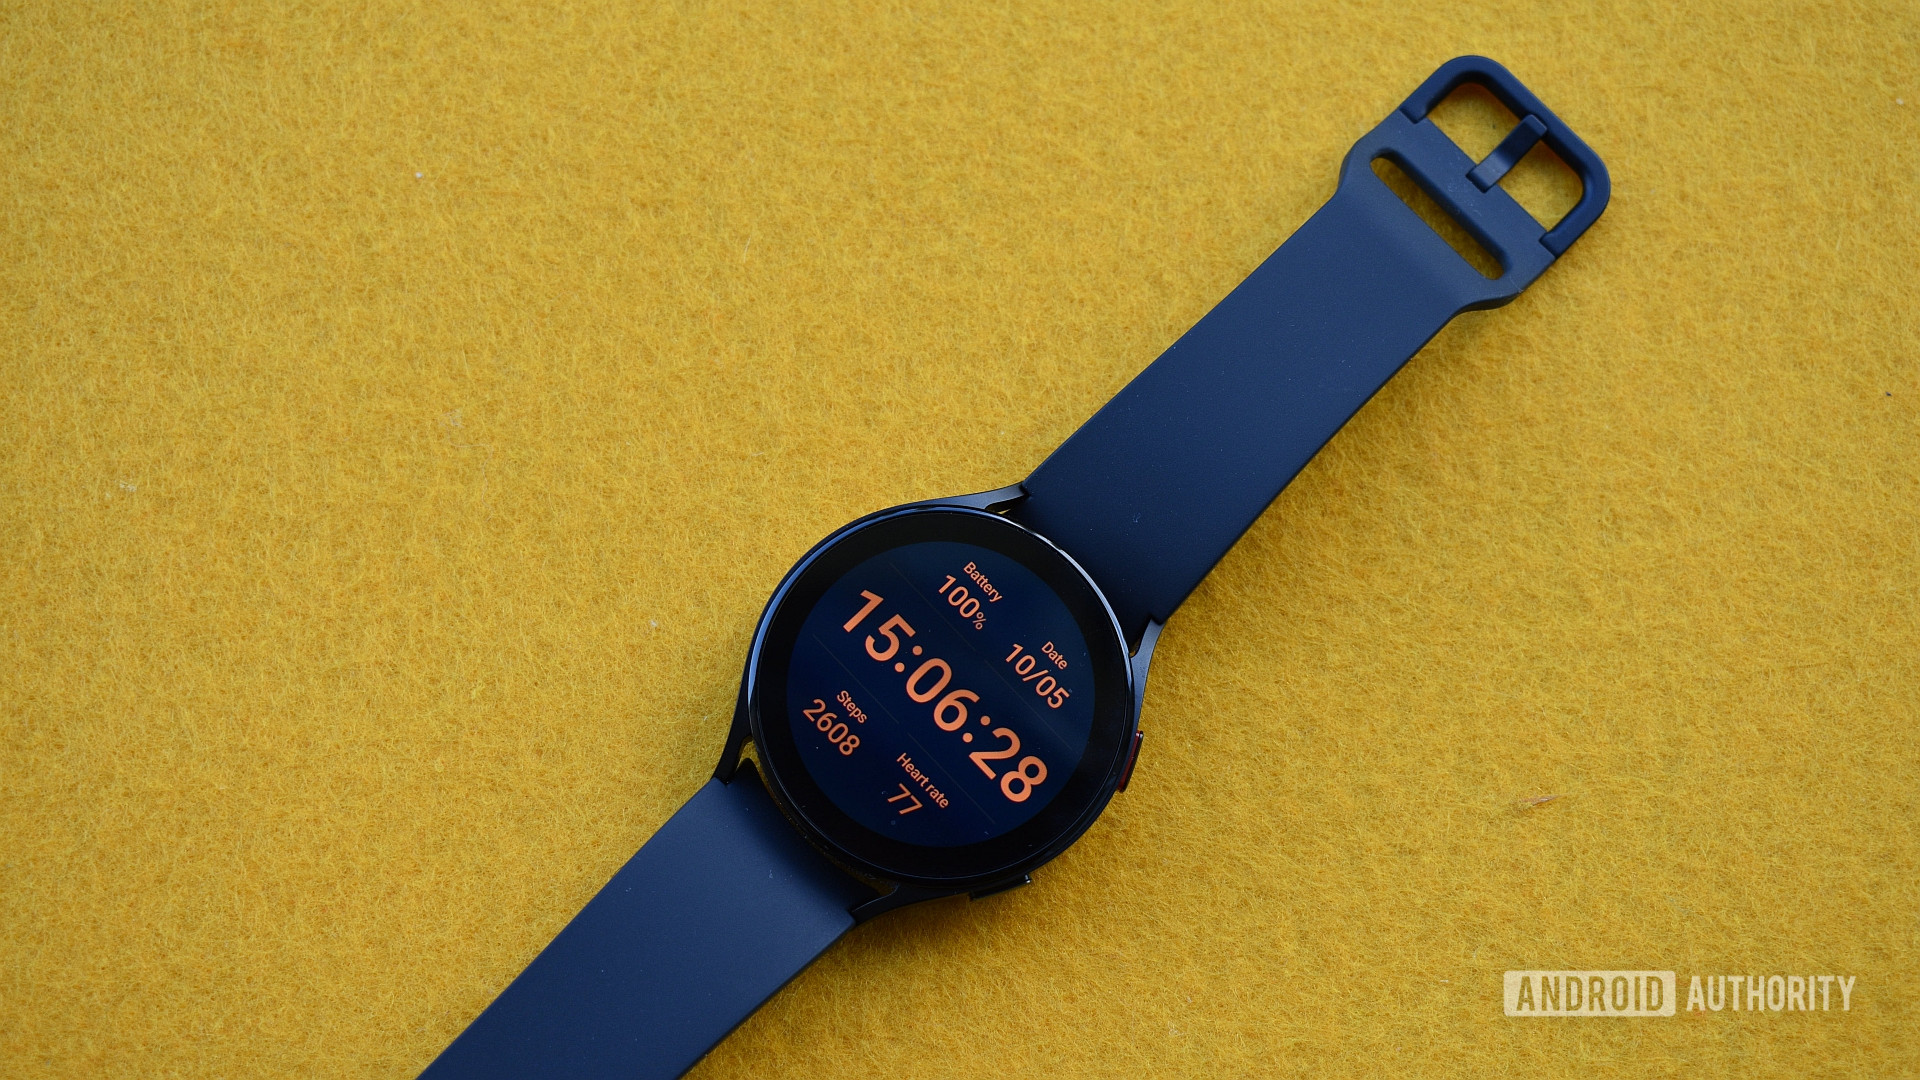 Samsung Galaxy Watch 5 watch face on yellow table